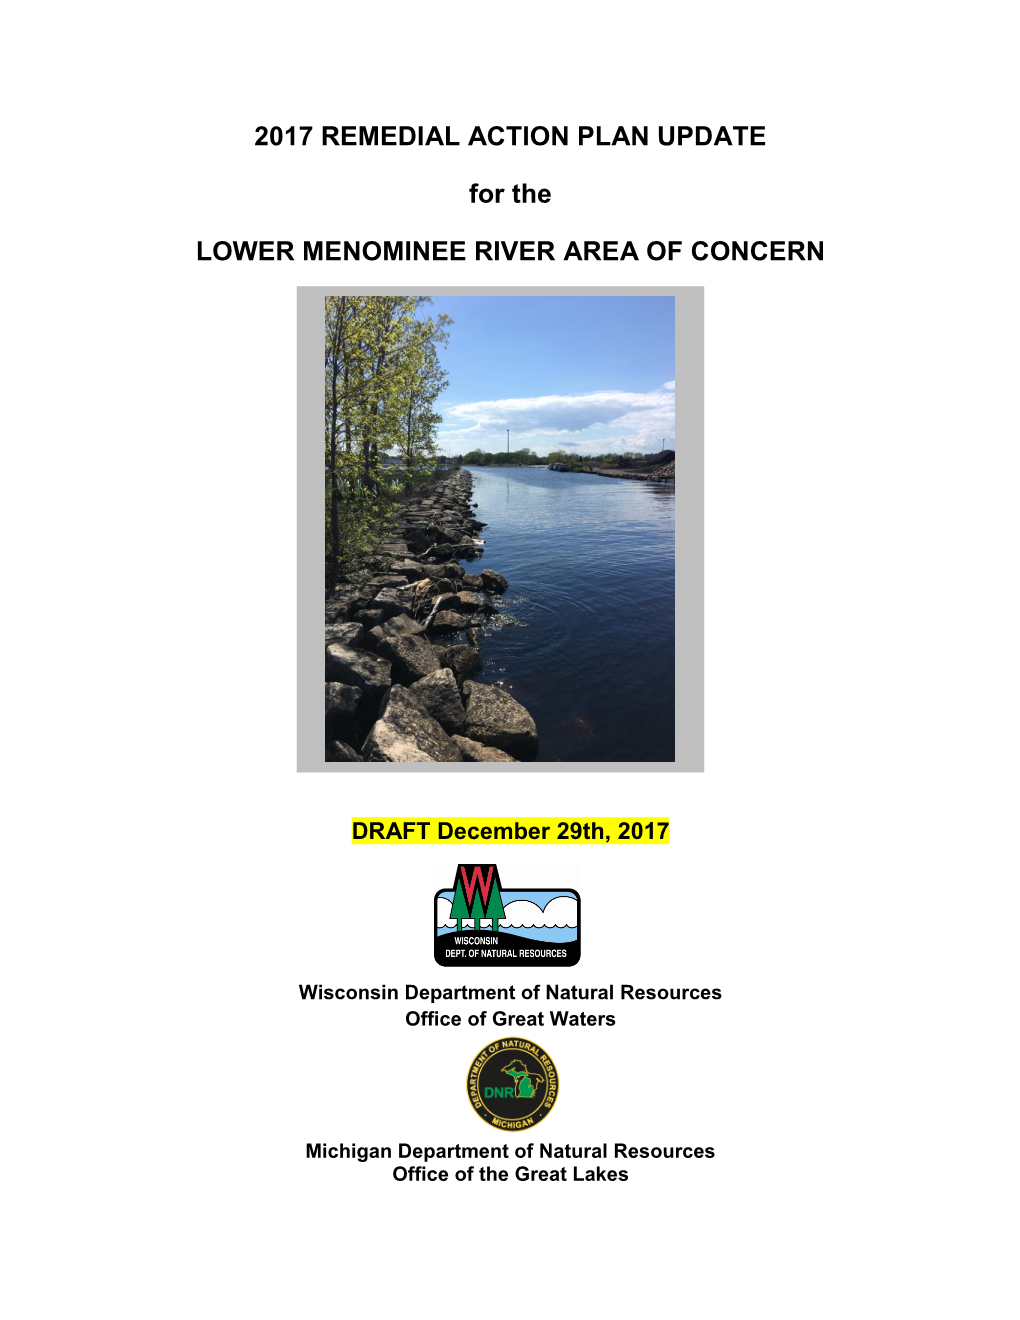 2017 Remedial Action Plan Update for the Lower Menominee River Area of Concern